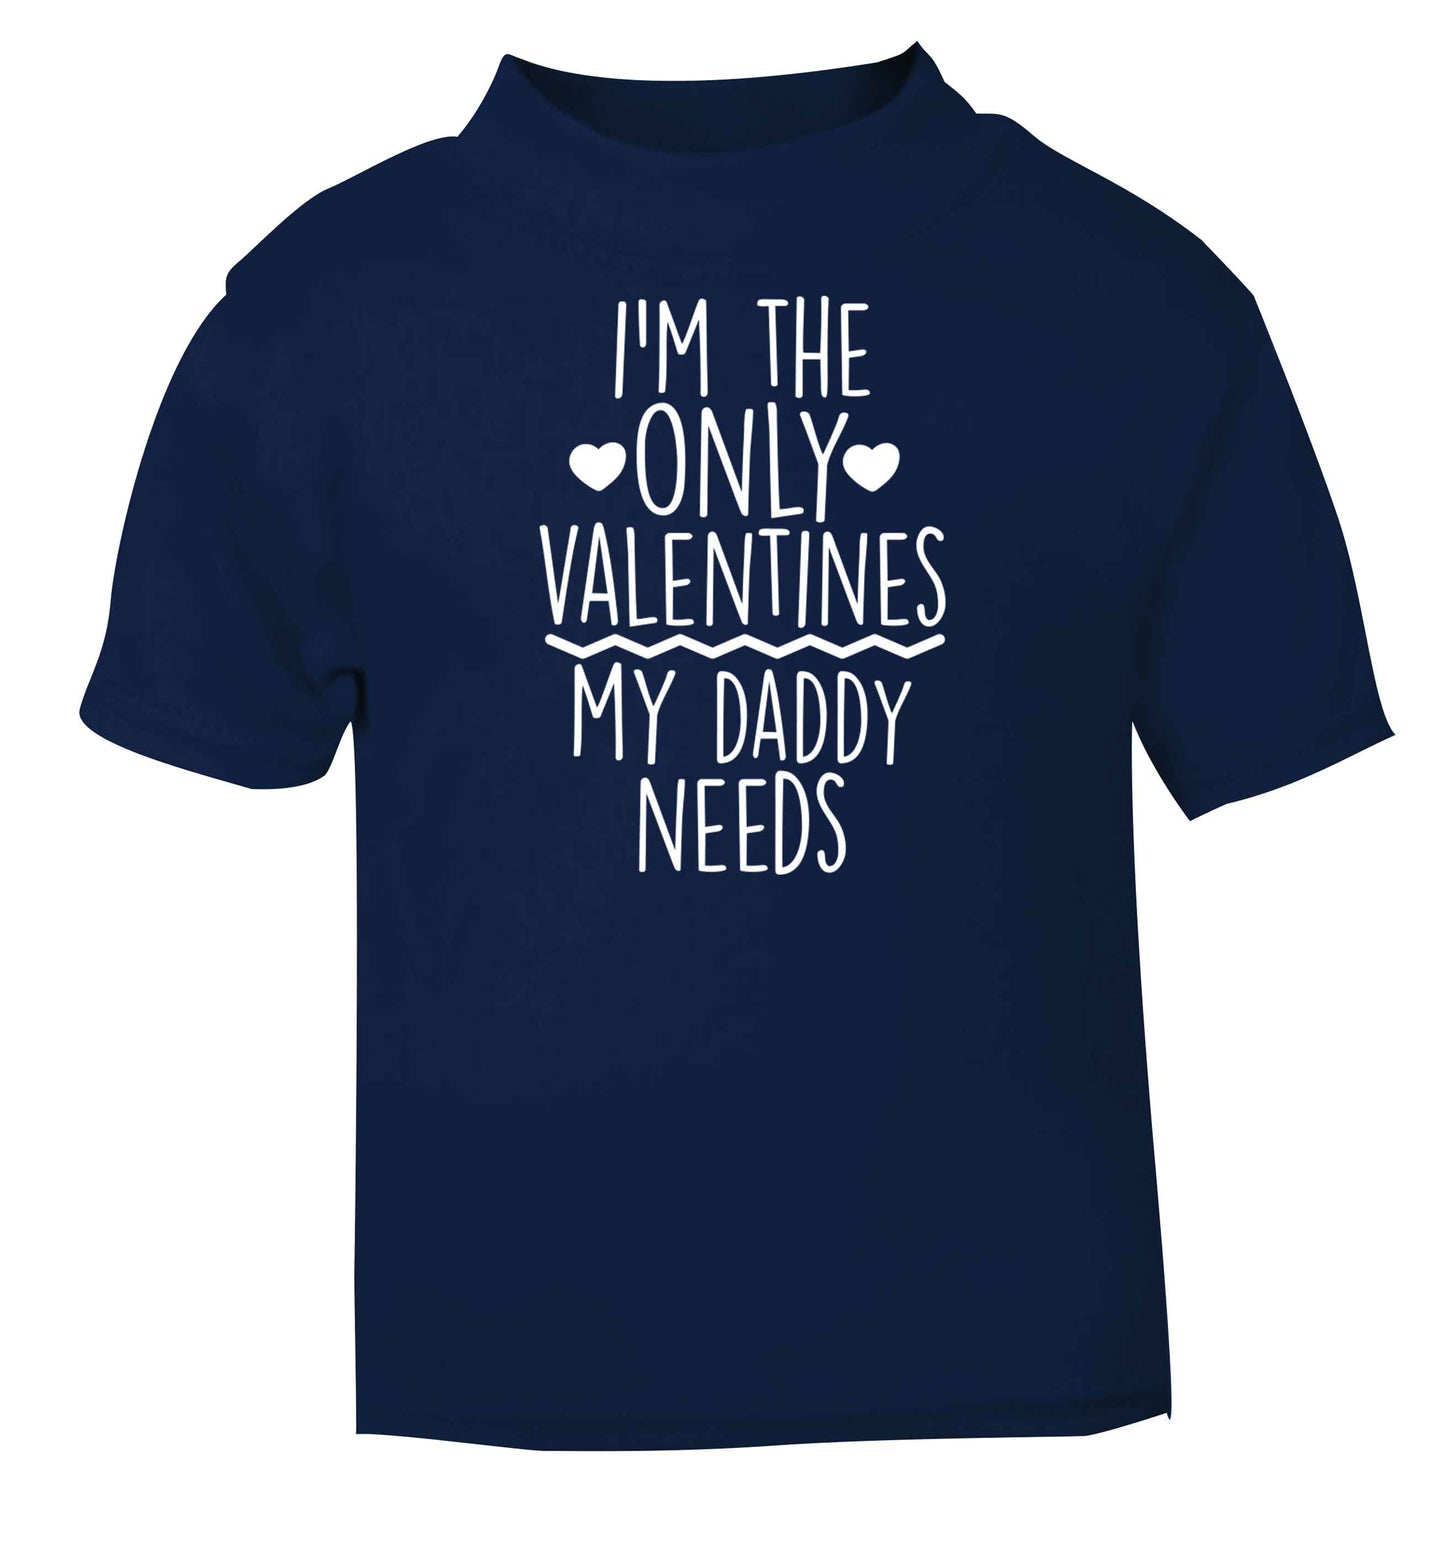 I'm the only valentines my daddy needs navy baby toddler Tshirt 2 Years